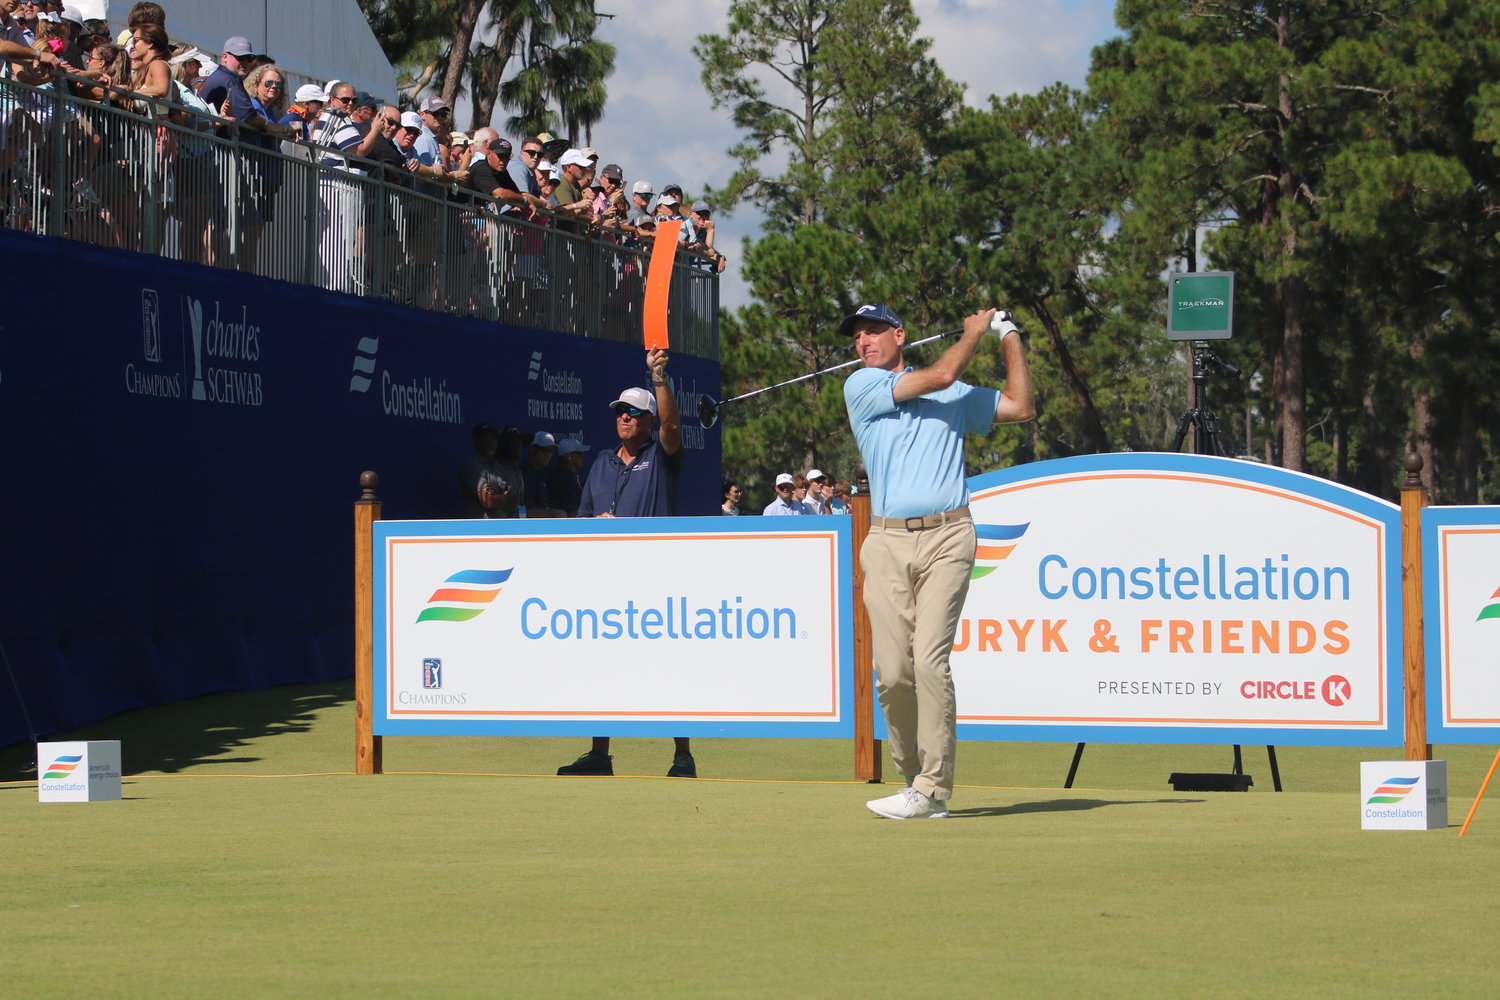 Jim Furyk found the balance of playing in his first tournament as host. He finished tied for fourth at 9-under.